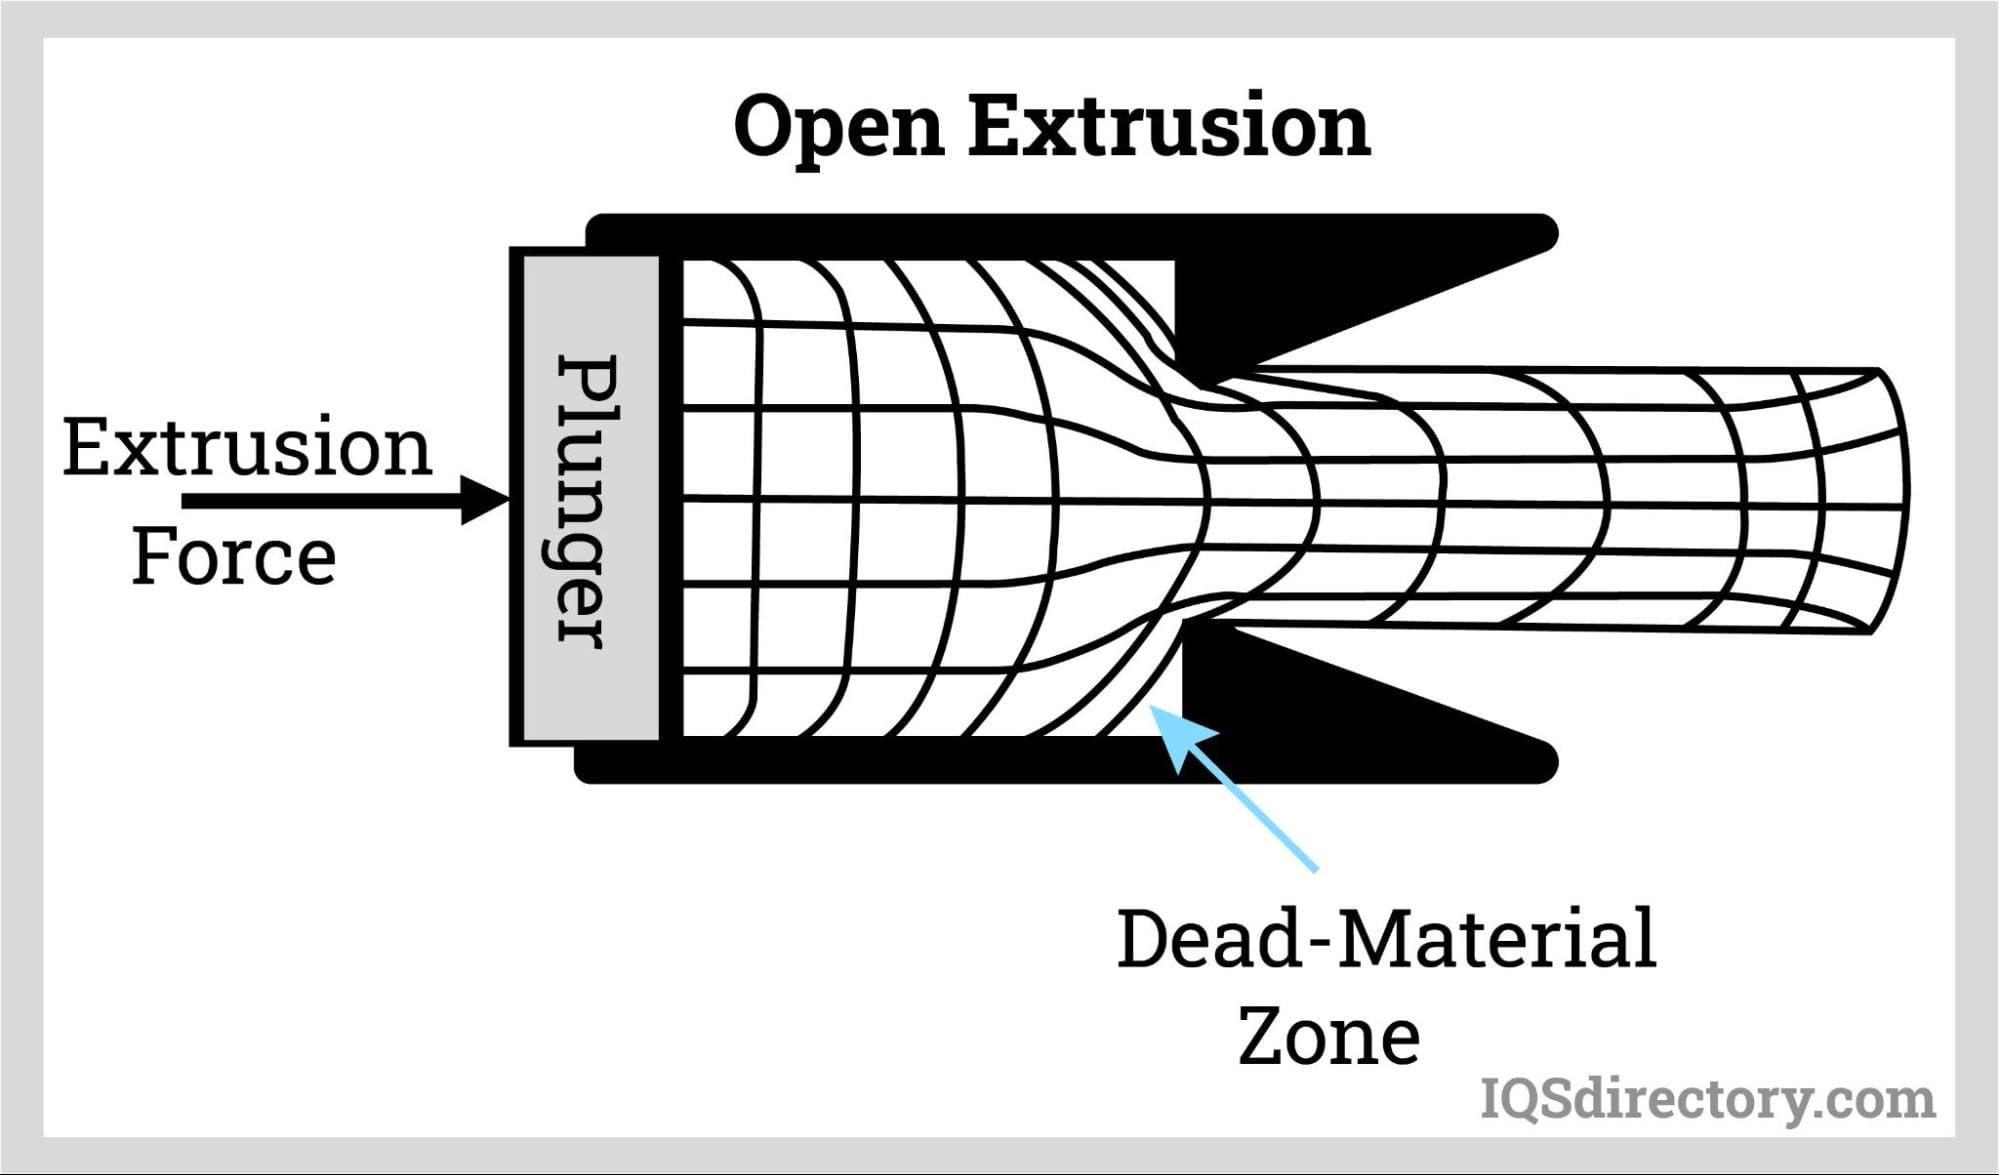 Open Extrusion